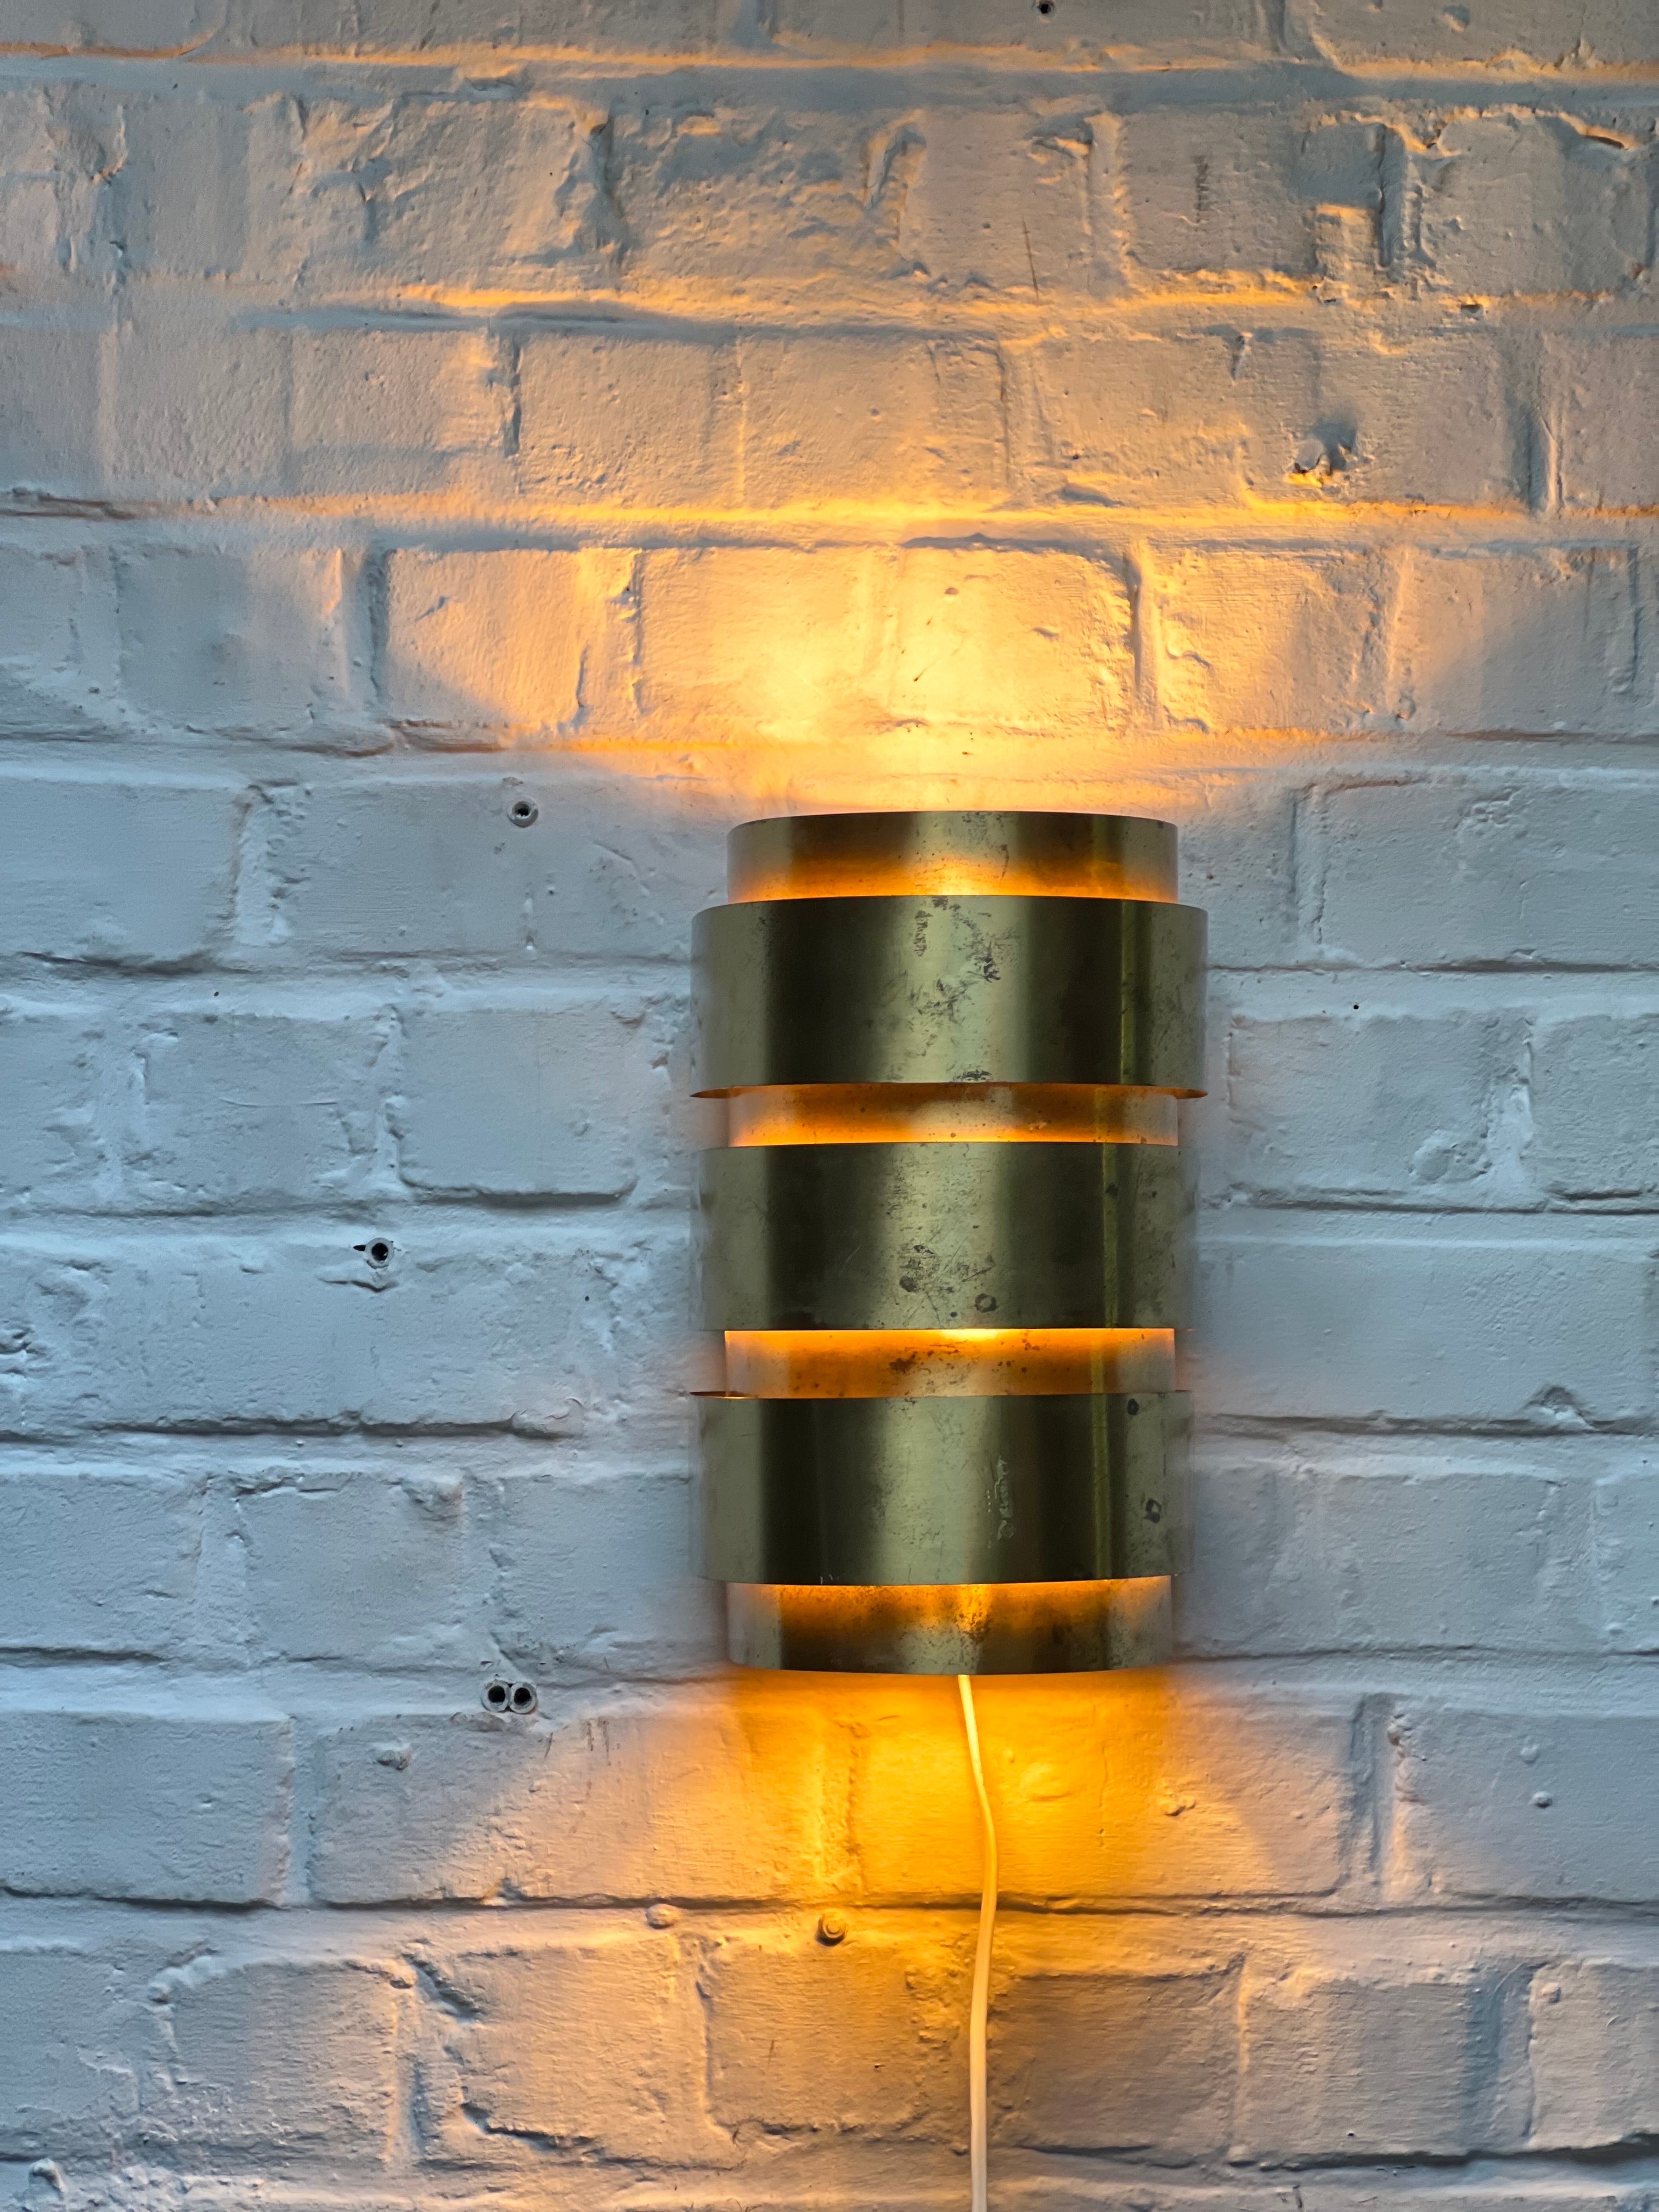 Nice brass wall lamps. They provide a warm atmosphere and even better when lighted. Made of thin stripes of brass delicately riveted with a brass nail to the metal frame. Minimal details. We have a set of 4 to match this one. Great to have them as a